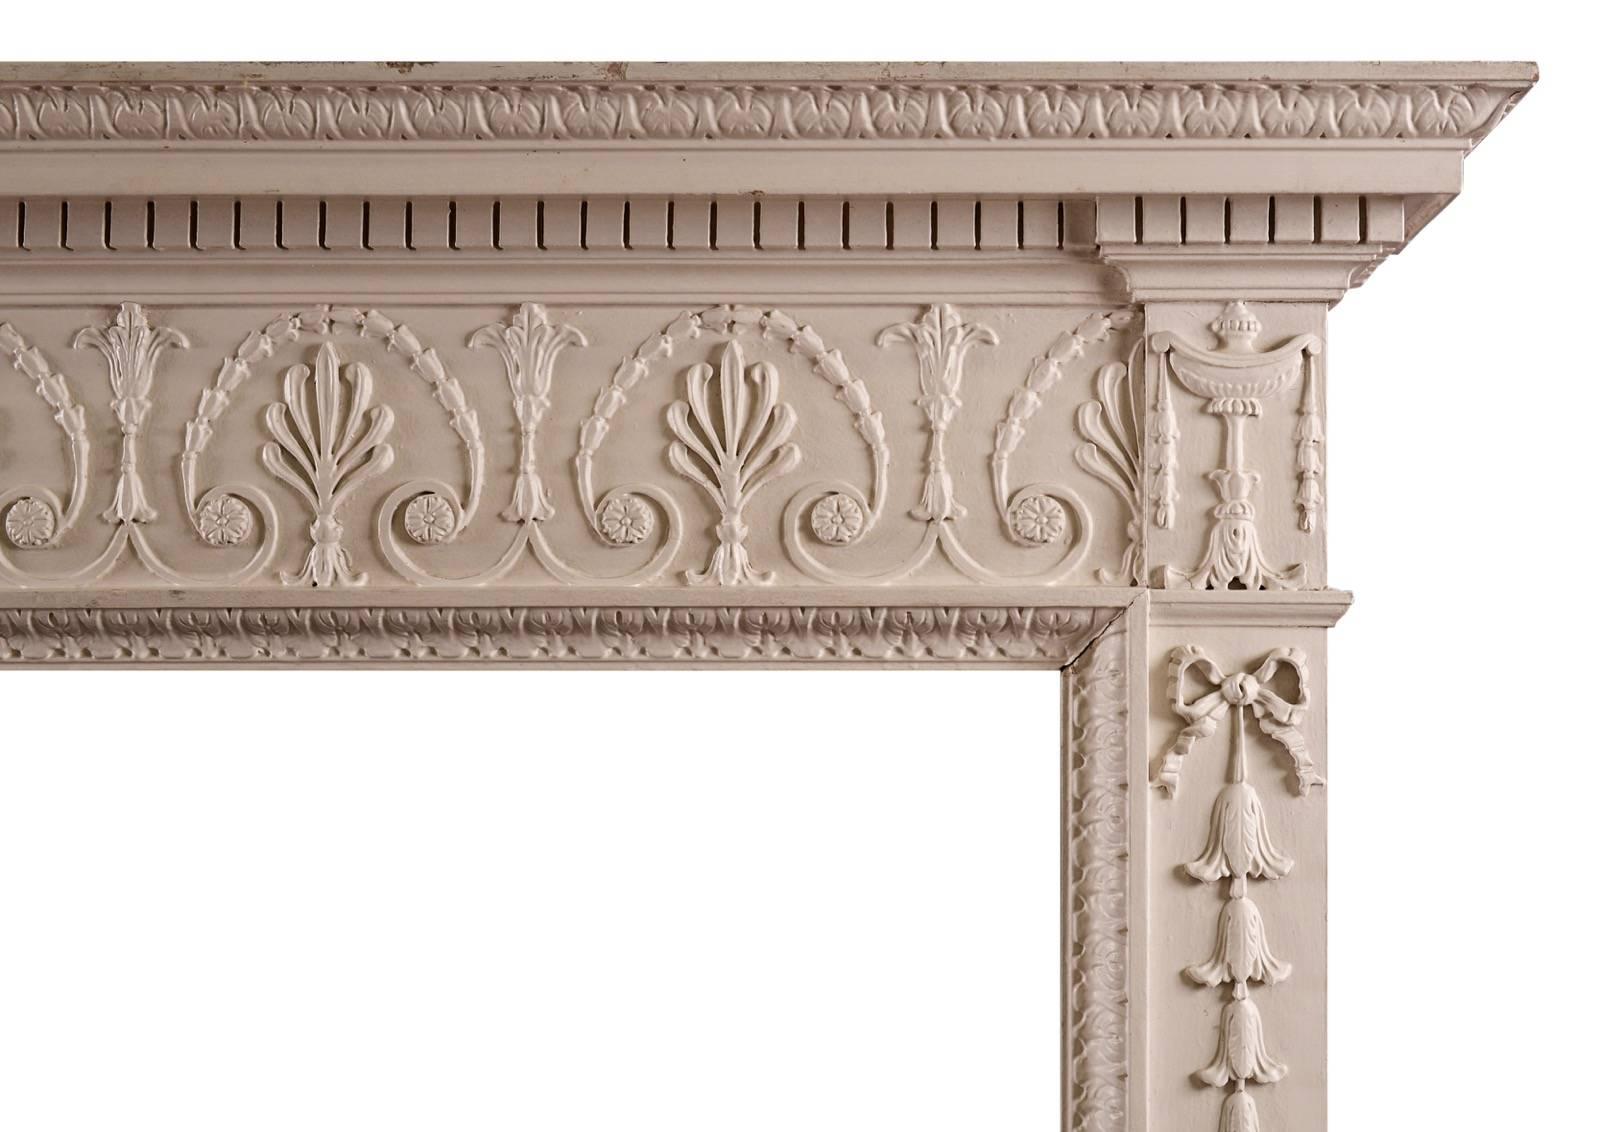 A finely carved pine George III style fireplace. The frieze with recurring palmette and bellflowers throughout, with classical urns to end blocks. The jambs with tied ribbons and belldrops. The shelf with dentils and acanthus leaves. English, 20th